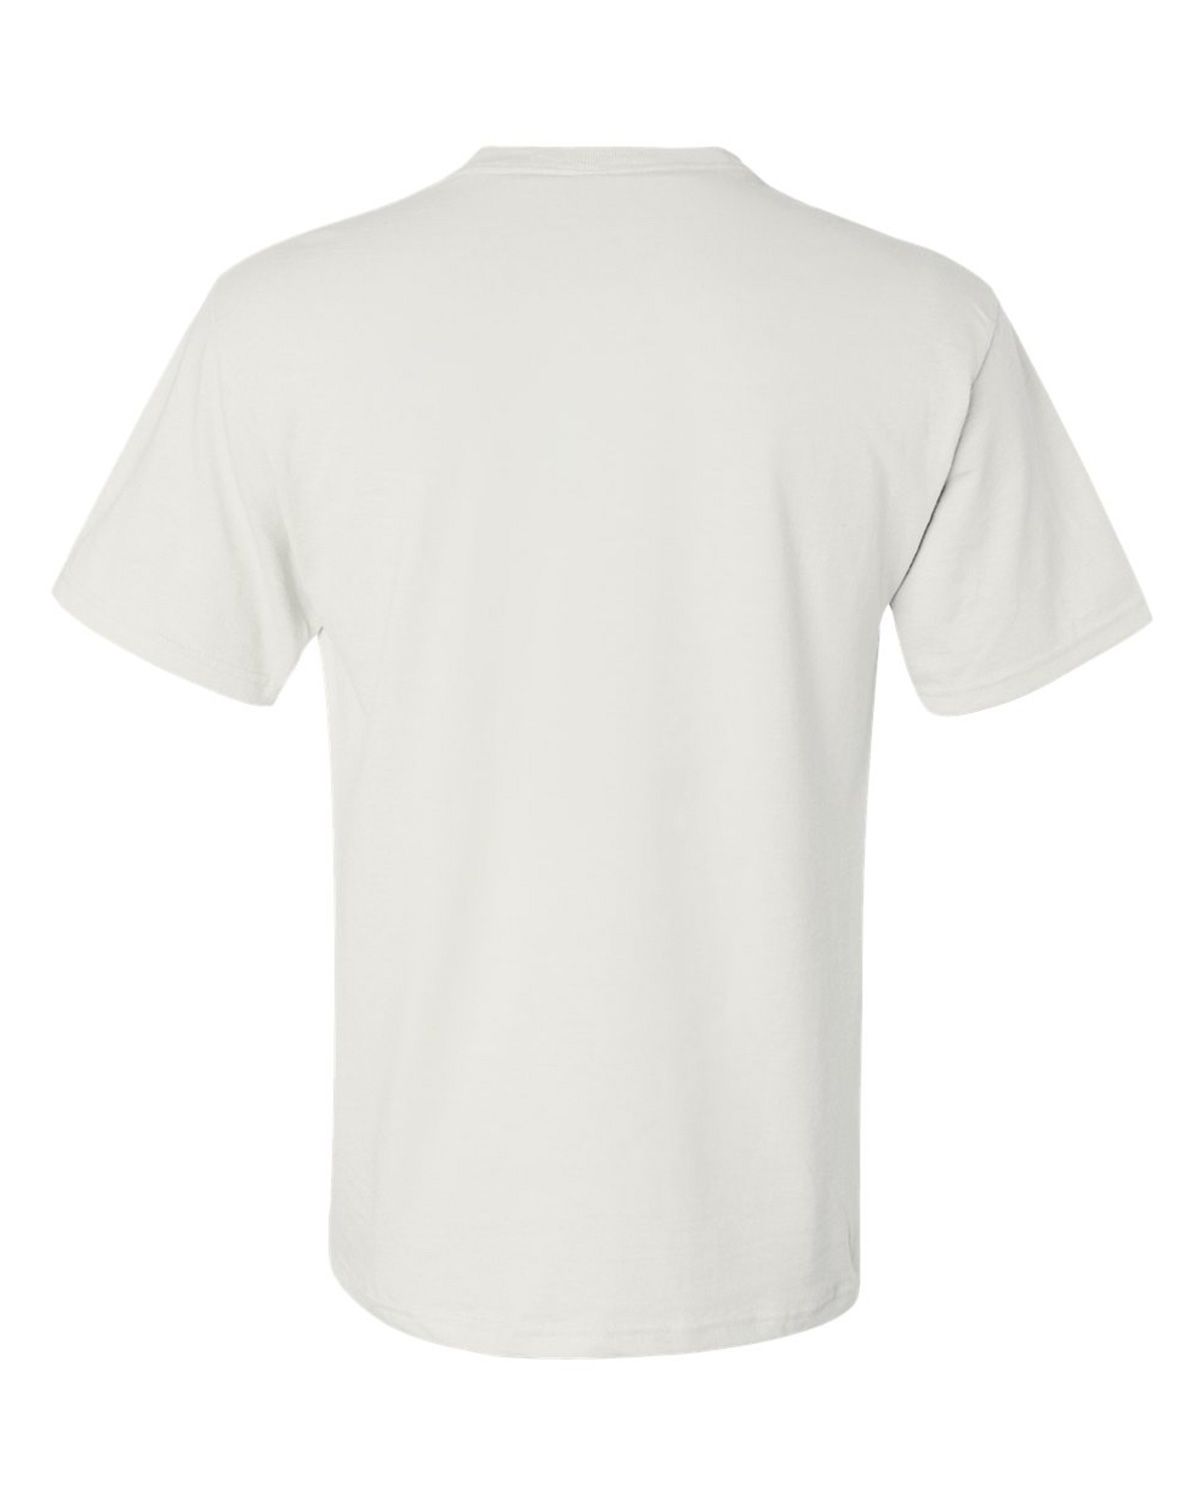 Size Chart for Jerzees 29MPR Dri-Power 50/50 T-Shirt with a Pocket